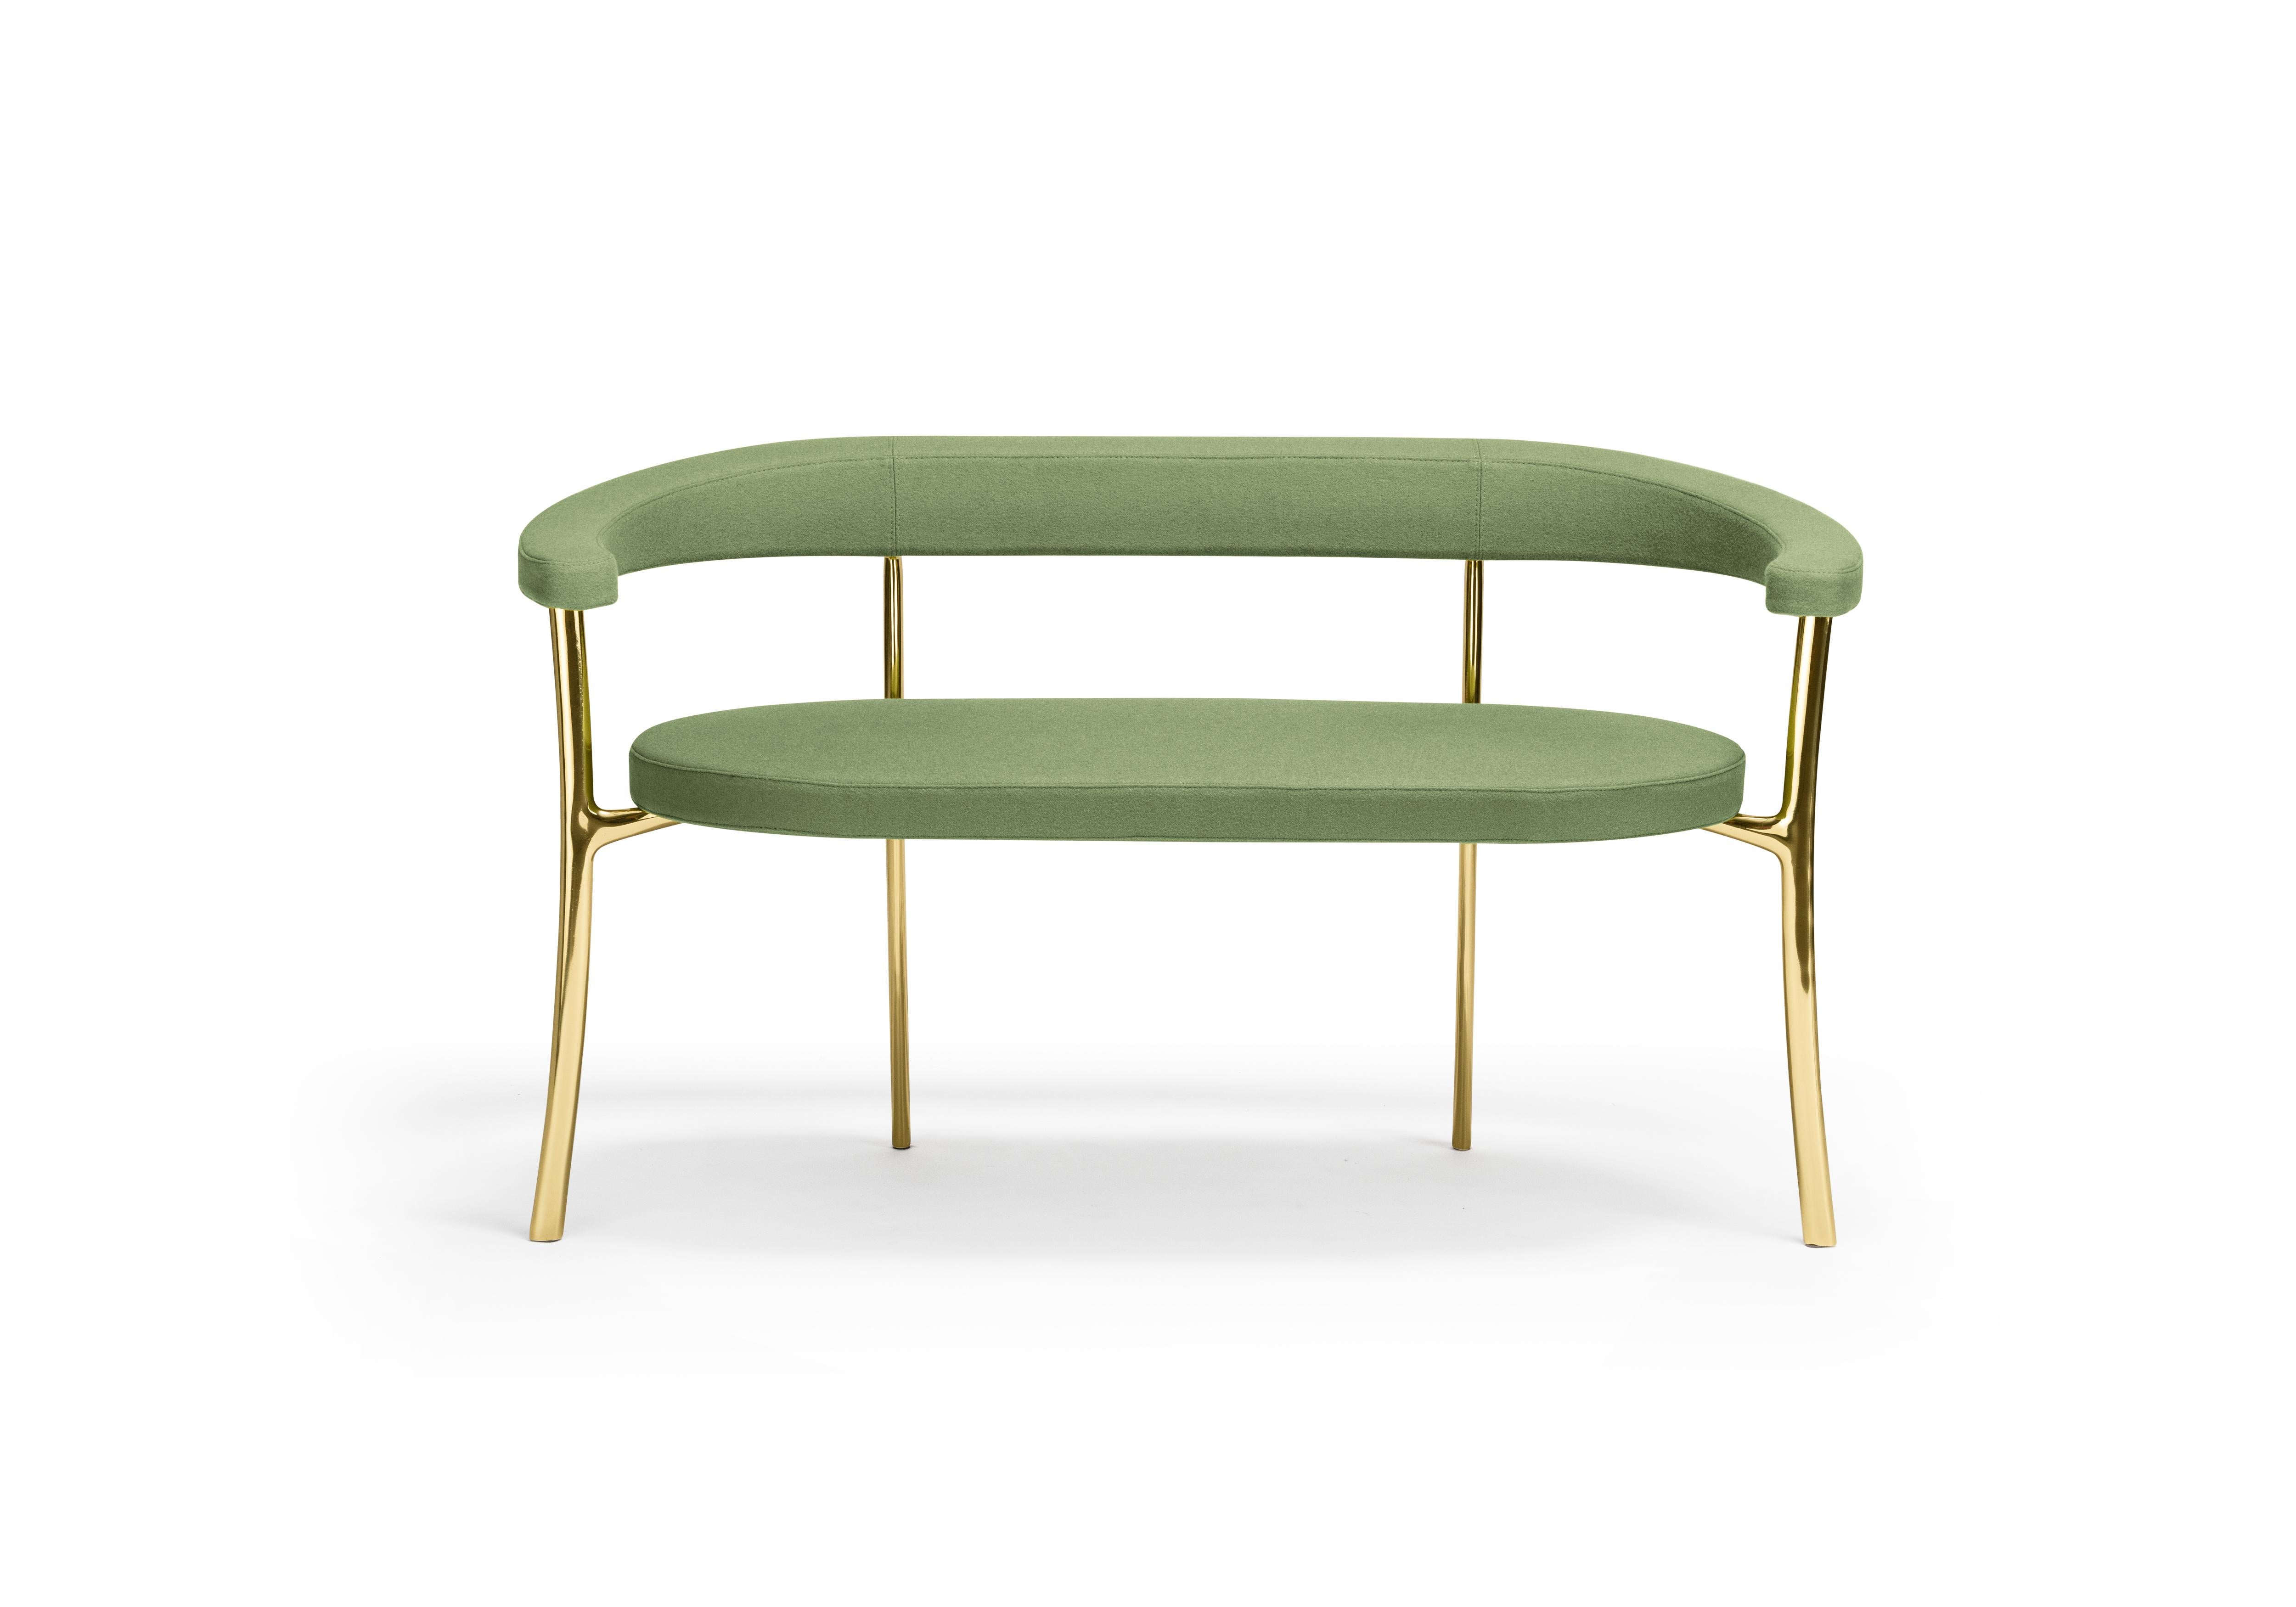 For Sale: Green (f-1241-c0931) Ghidini1961 Katana bench in Fabric with Polished Brass Legs by Paolo Rizzatto